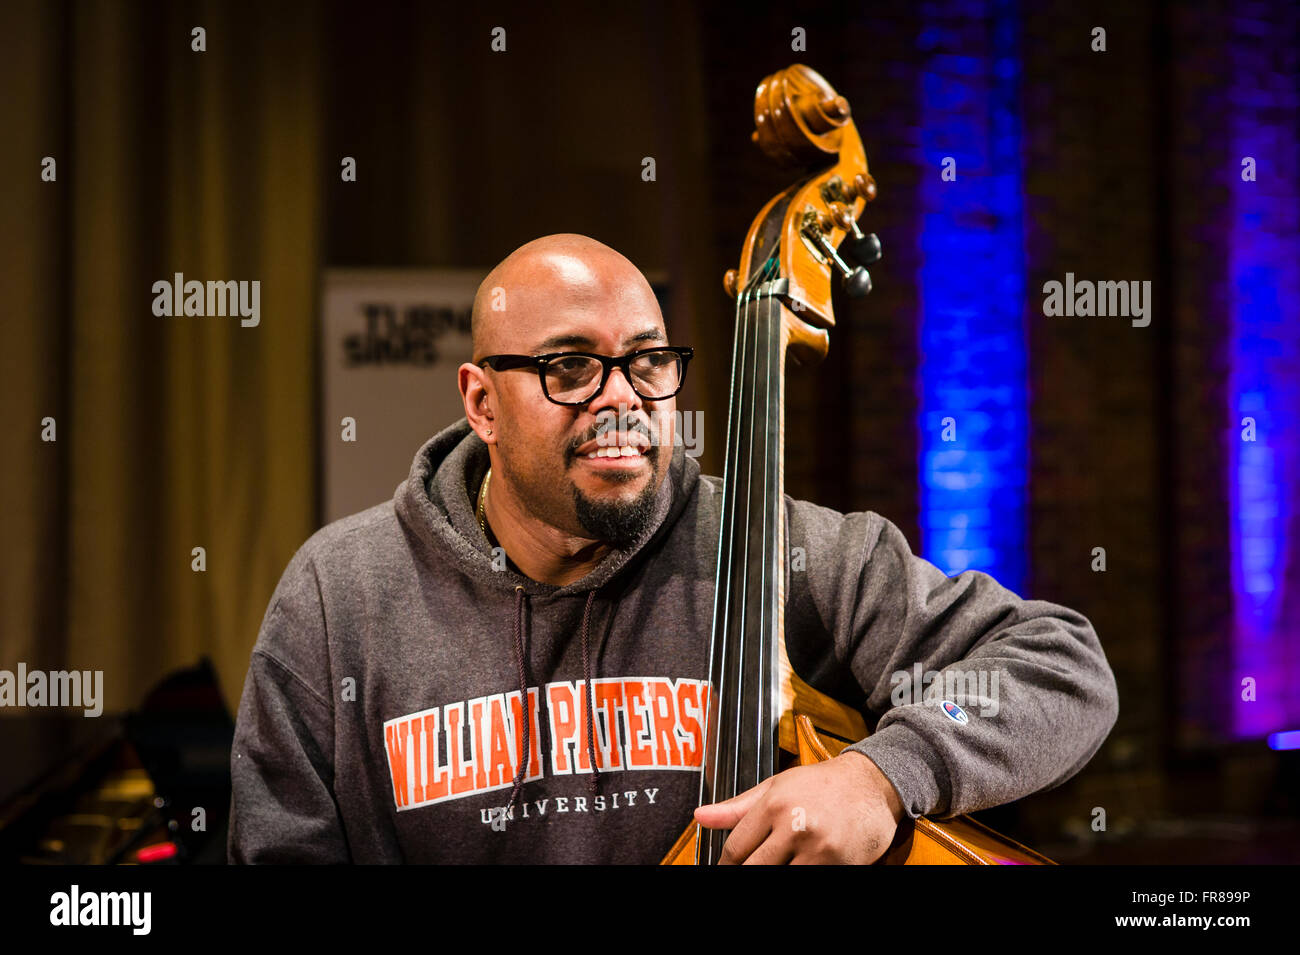 American bass player Christian McBride at soundchecks at the Turner Sims Concert Hall in Southampton, England. Stock Photo